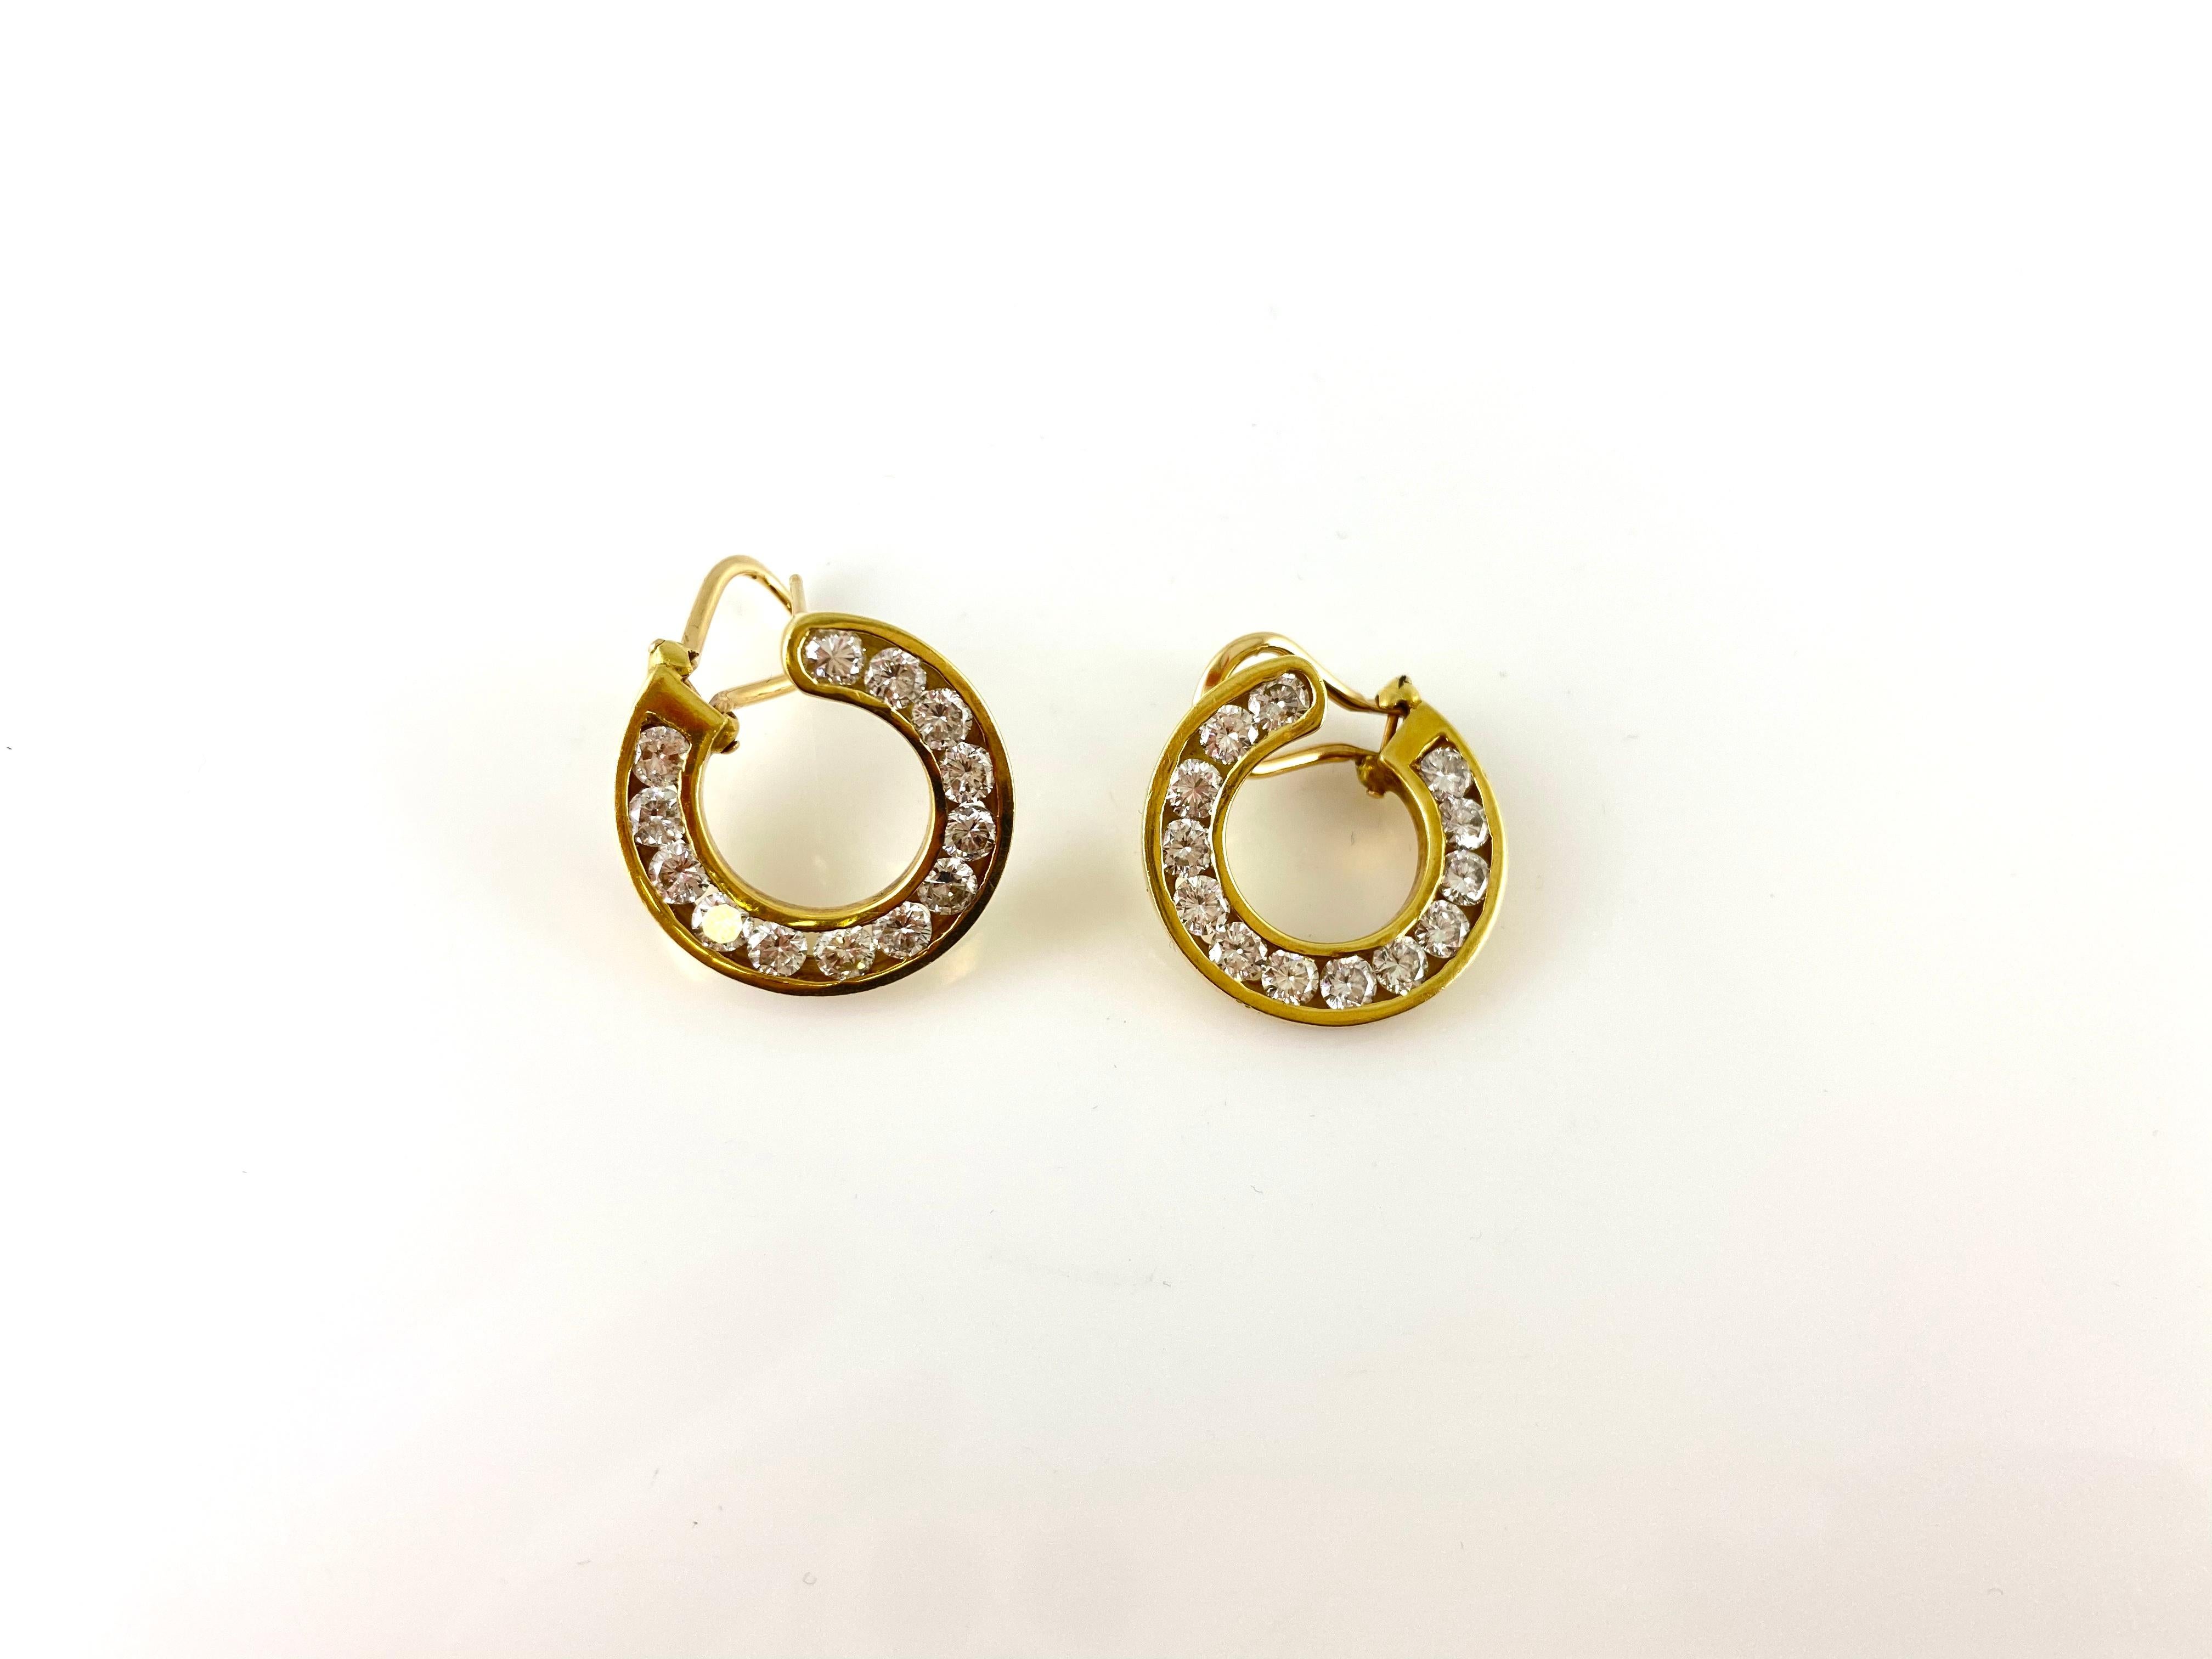 The earrings are finely crafted in 18k yellow gold with round diamonds weighing approximately total of 3.40 carat.
Circa 1908.